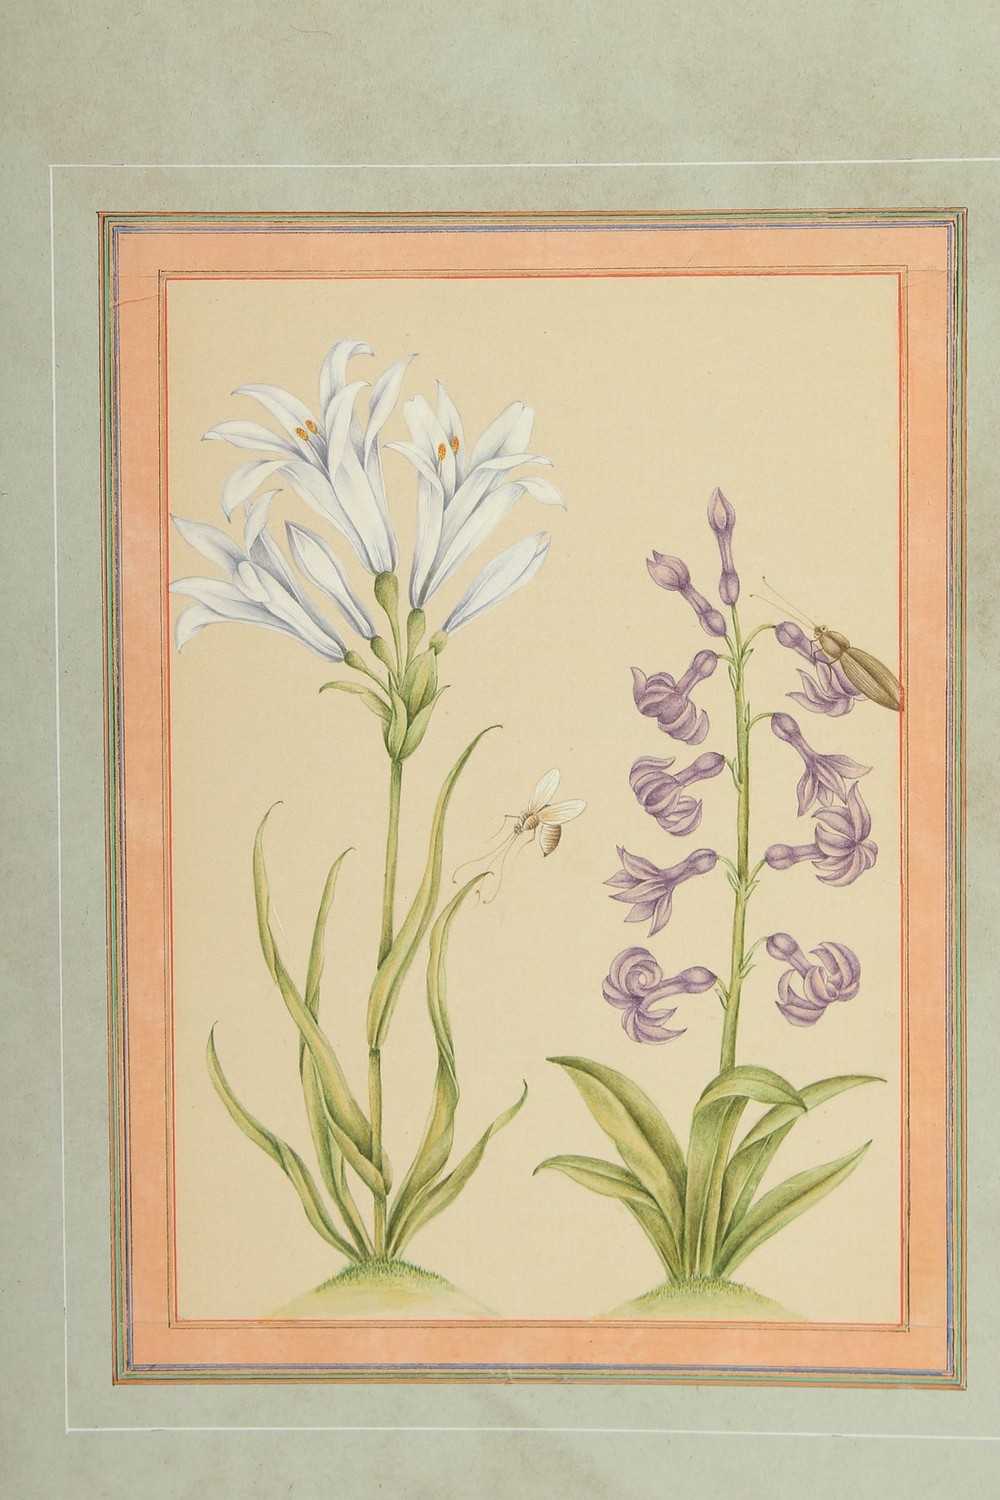 A FINE PERSIAN QAJAR PAINTING OF FLOWERS, image 18cm x 12.5cm. - Image 2 of 3